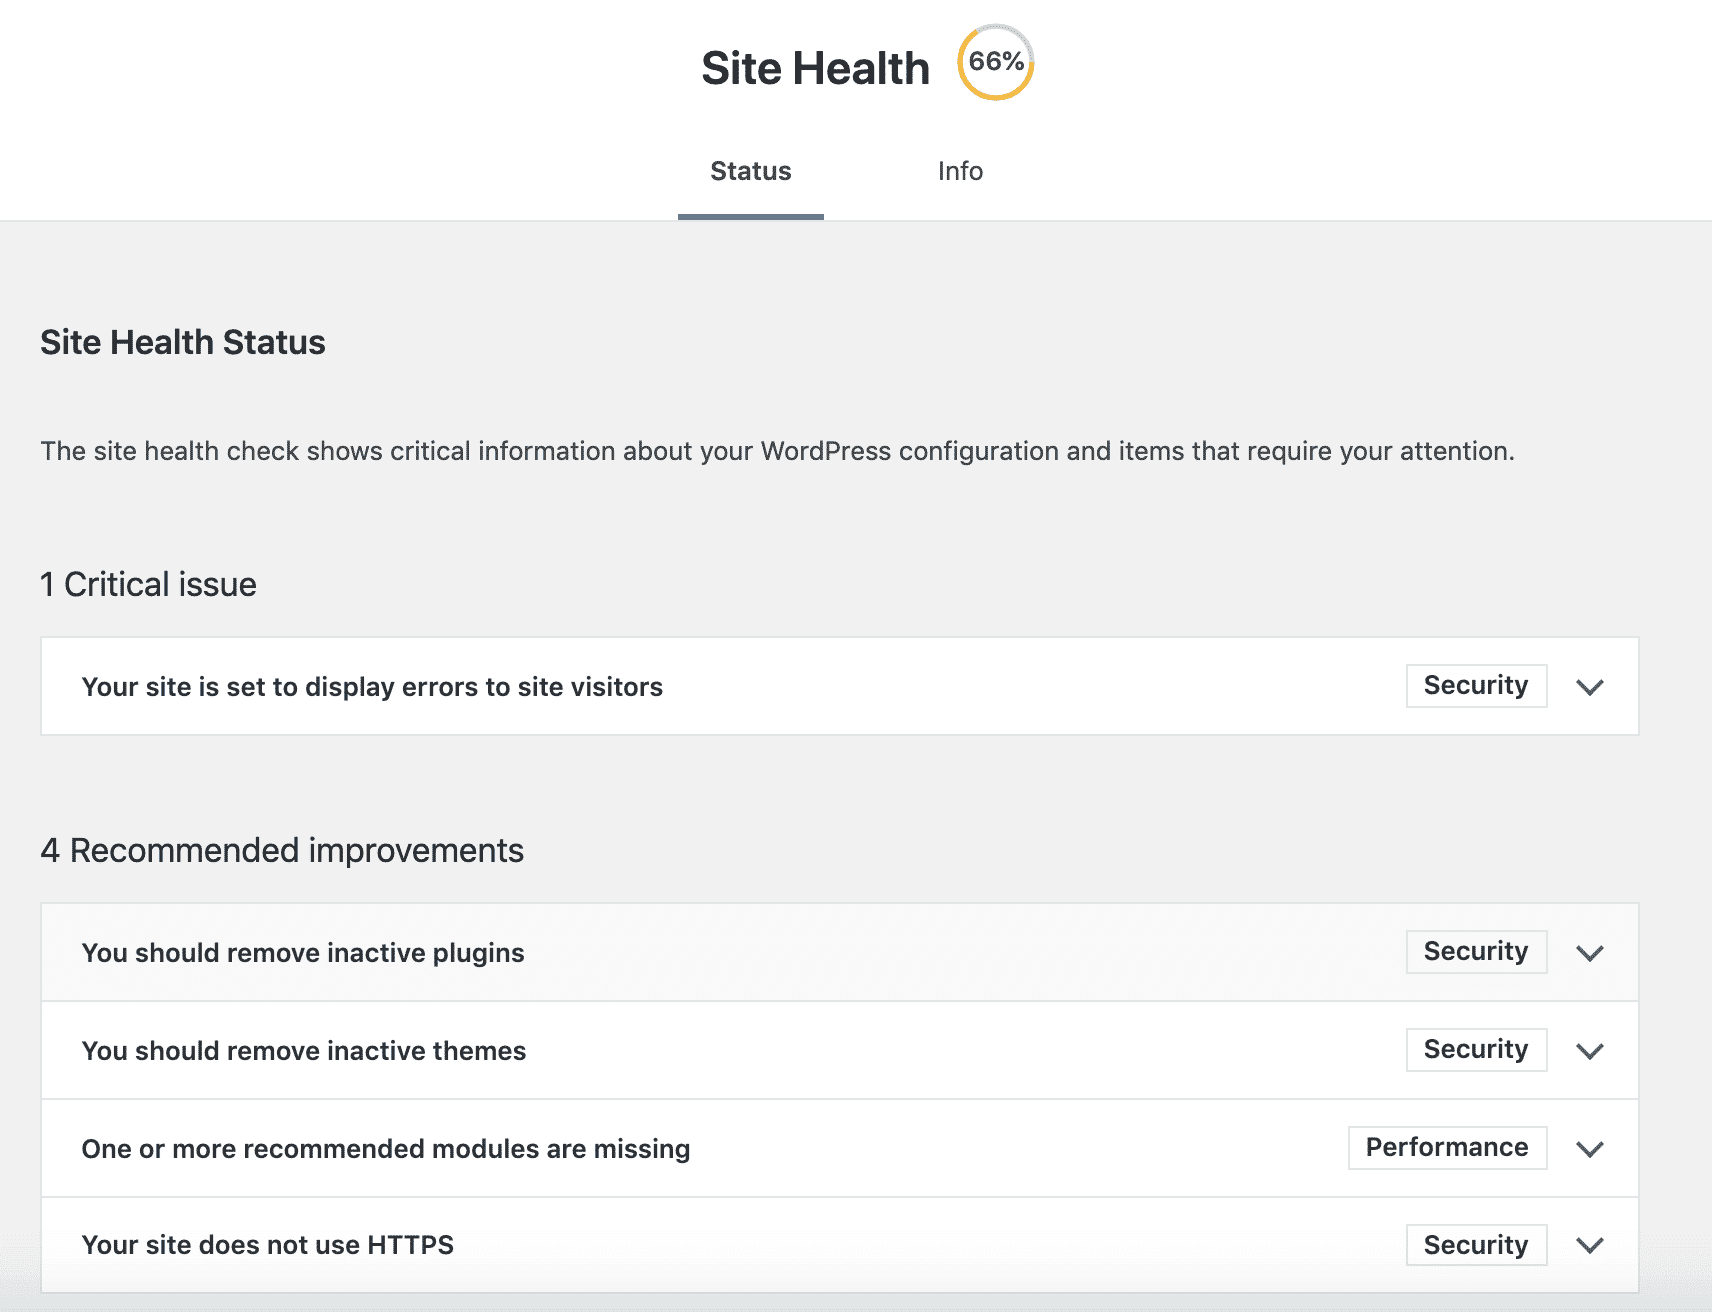 Site Health Status page in WordPress 5.2